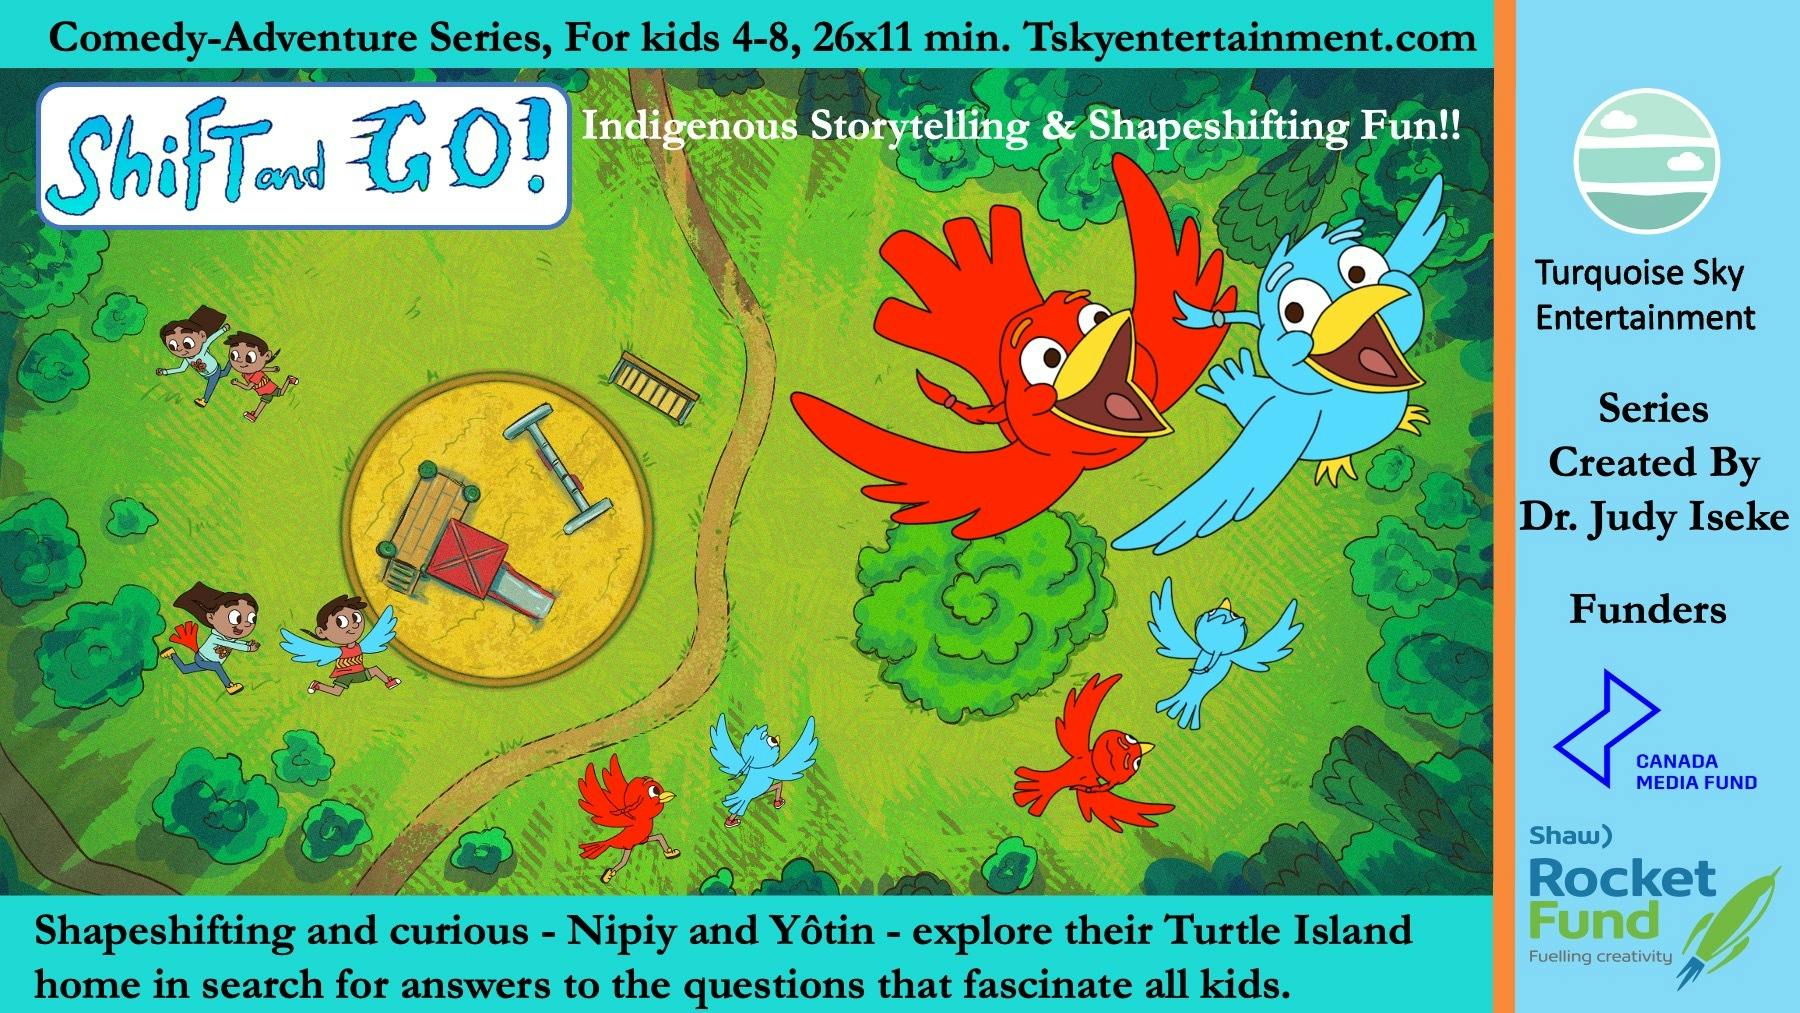 Cartoon Illustration of "Shift and Go!" 
Text reads: 
"Comedy-Adventure Series, for Kids 4-8, 26.11min. Tskyentertainment.com"
"Shift and GO!" "Indigenous Storytelling & Shapeshifting Fun!!

Along the bottom: 
"Shapeshifting and curious - Nipiy and Yotin - explore their Turtle Island home in search for answers to the questions that fascinate all kids."

On the right: 
"Turquoise Sky Entertainment
Series 
Created By
Dr. Judy Iseke
Canada Media Fund
Shaw Rocket Fund Fueling Creativity" 